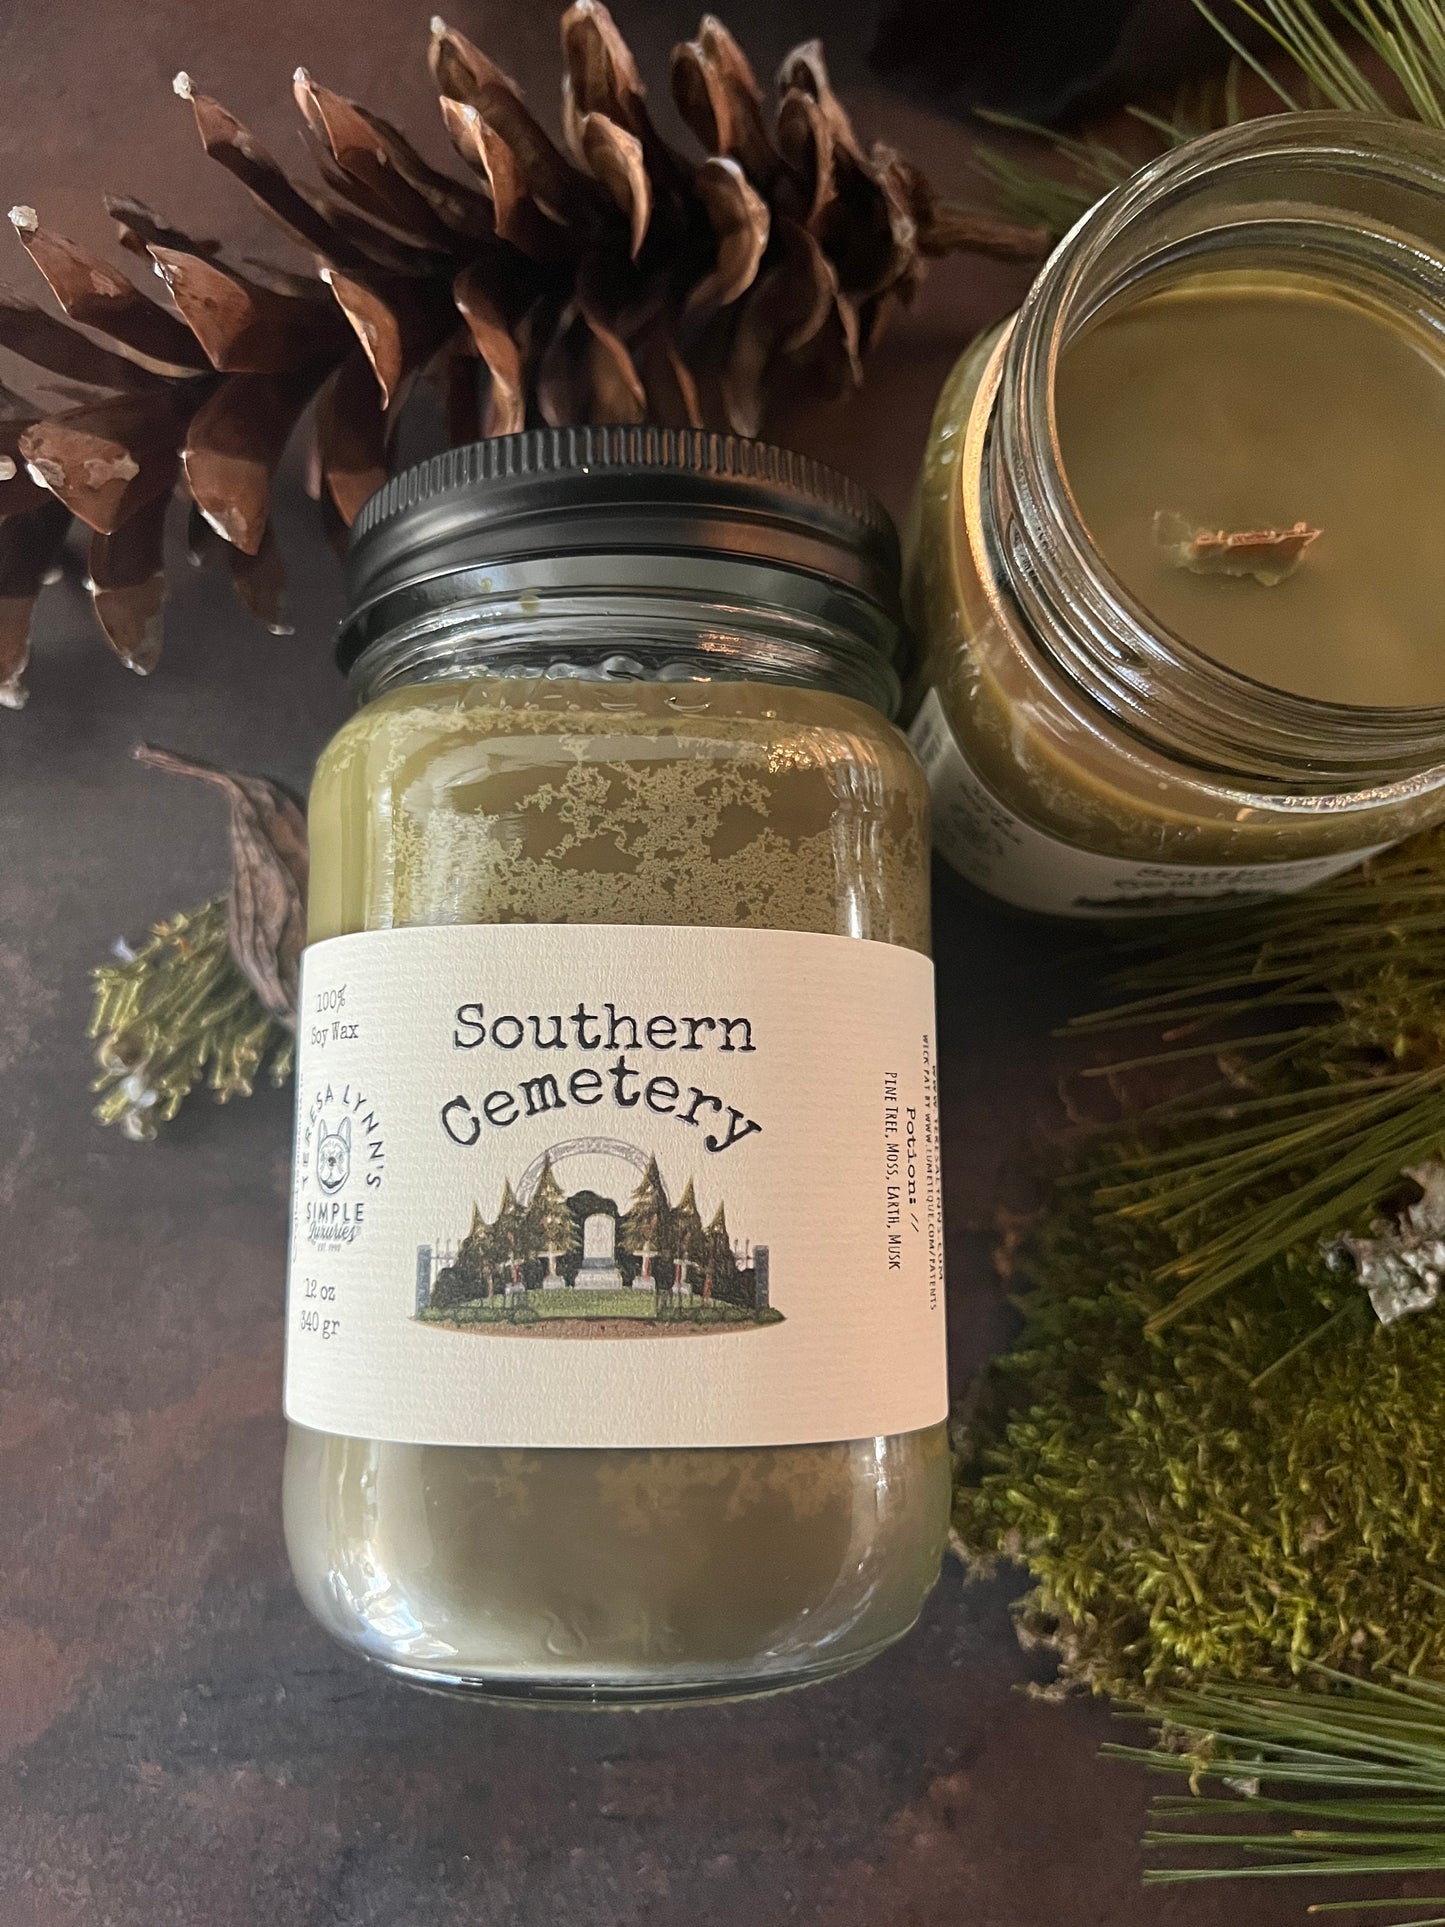 Southern Cemetery, scented wooden wick soy candle, handmade candle, evergreen, moss, musk, earth, vmber, ethereal, witch vibe, mysterious